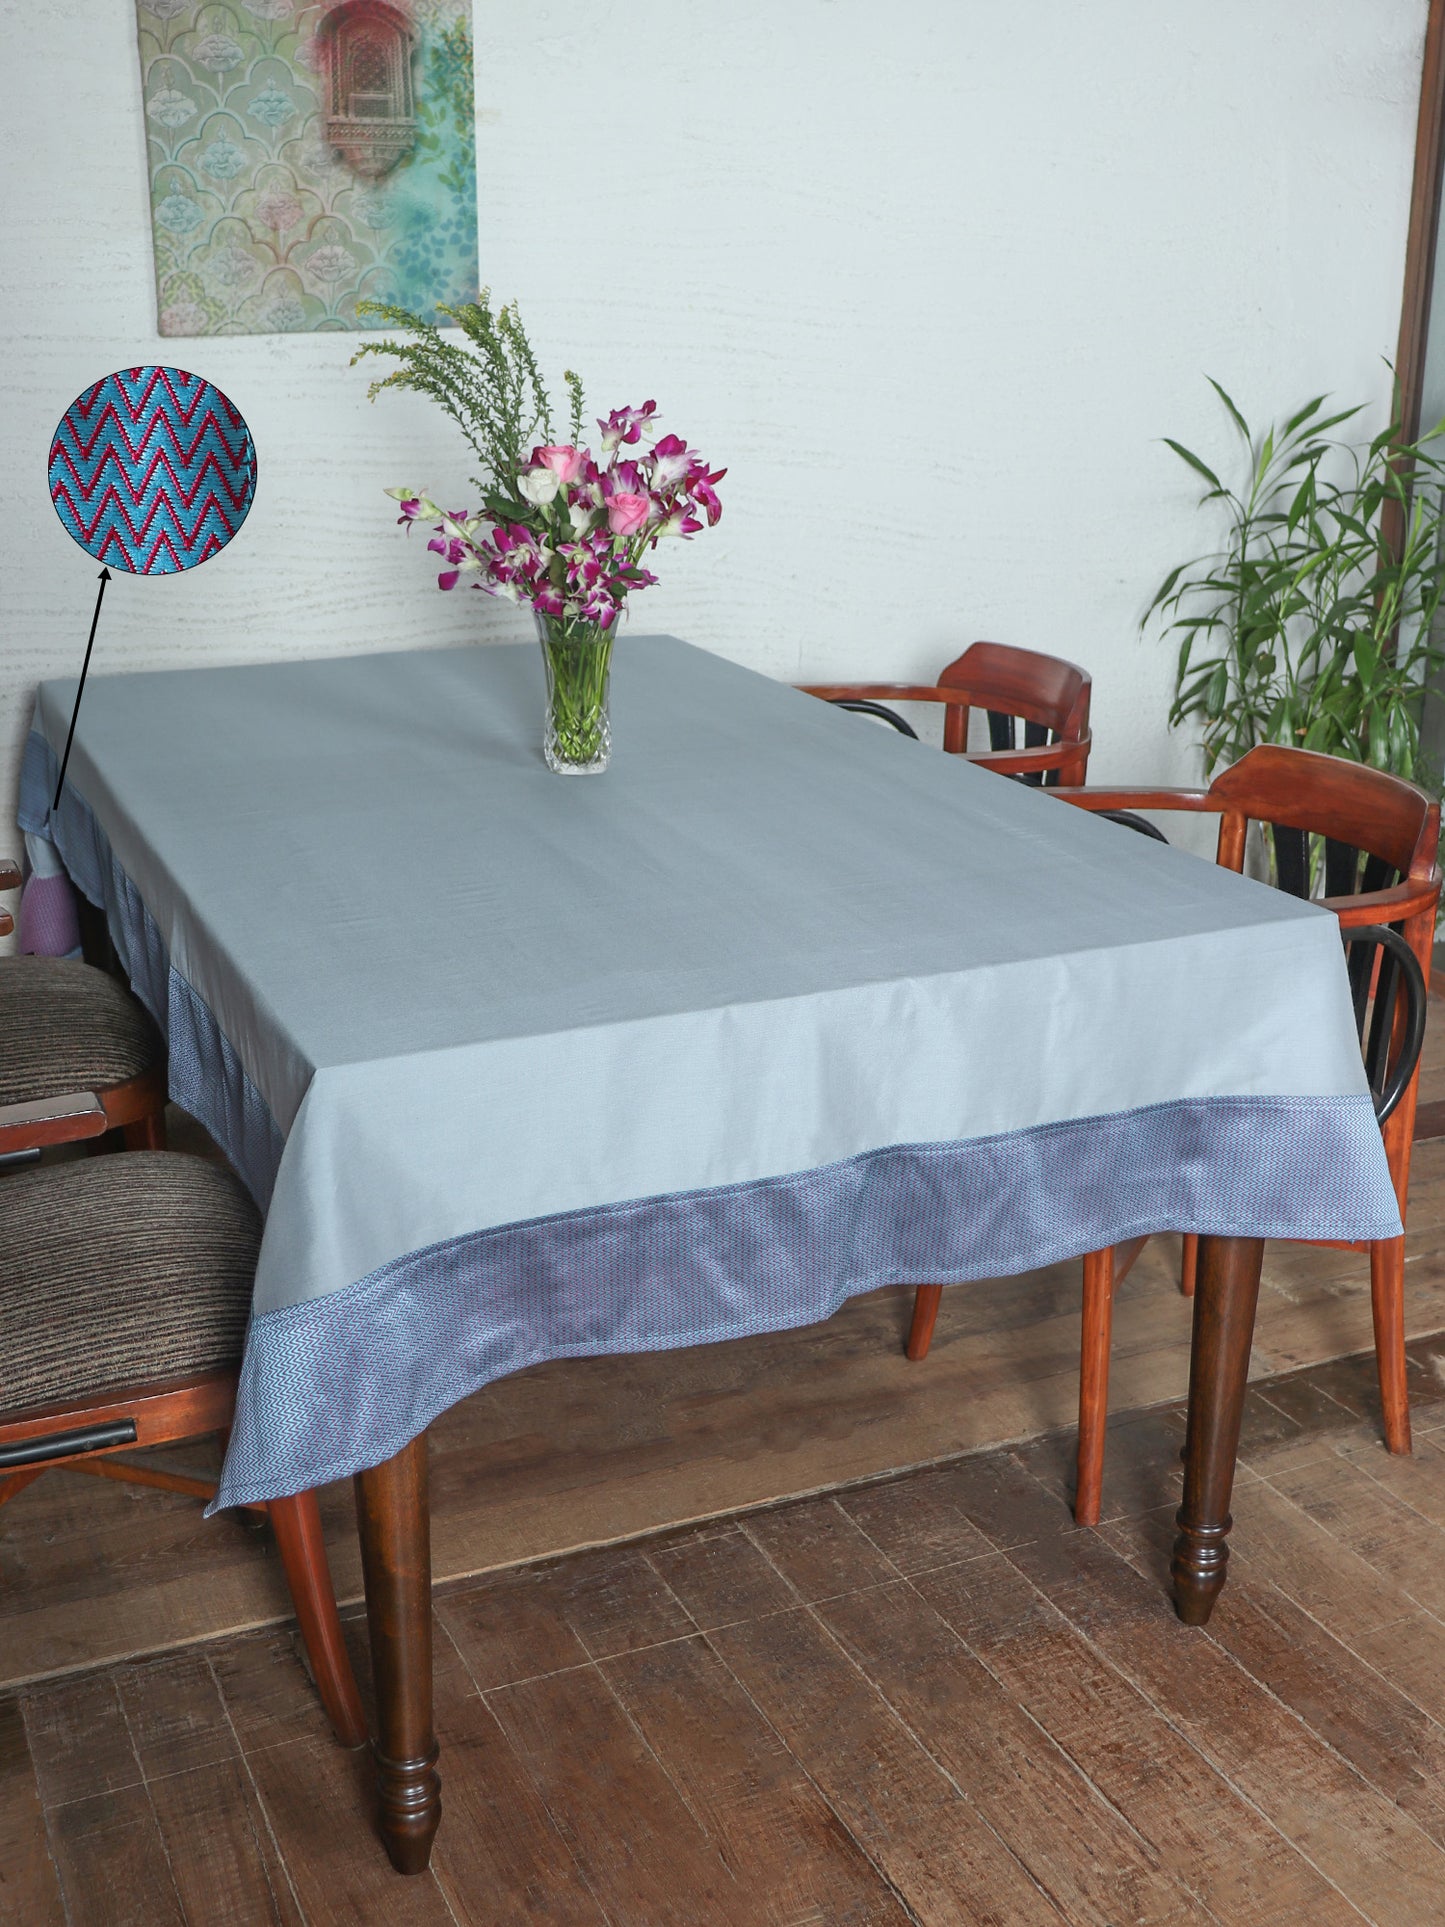 Table Cover with Panel Border with Brocade Silk in Chevron Pattern